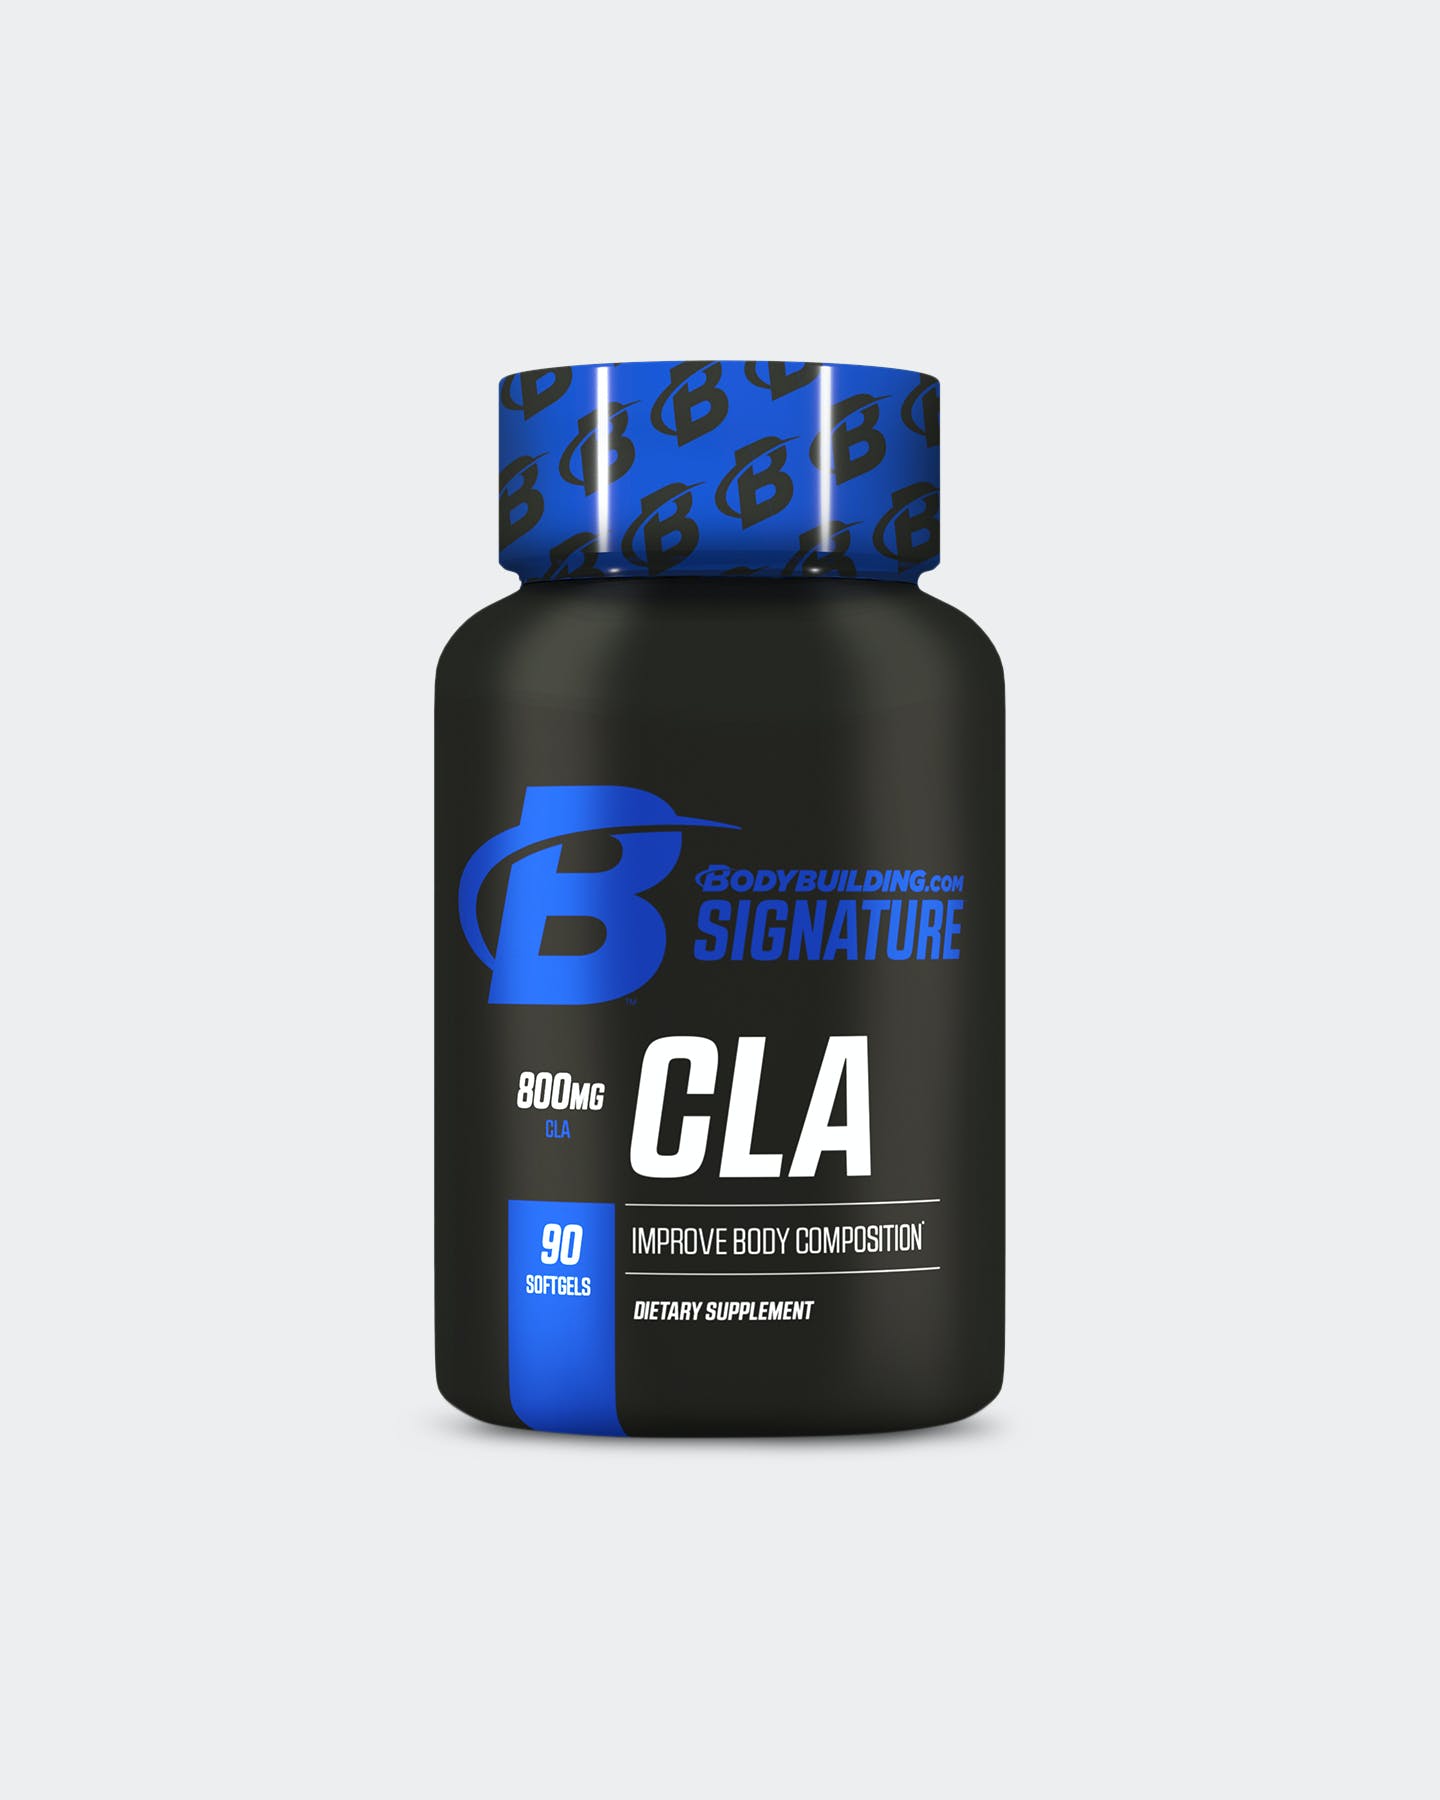 Image of Bodybuilding.com Signature CLA Weight Loss Supplement